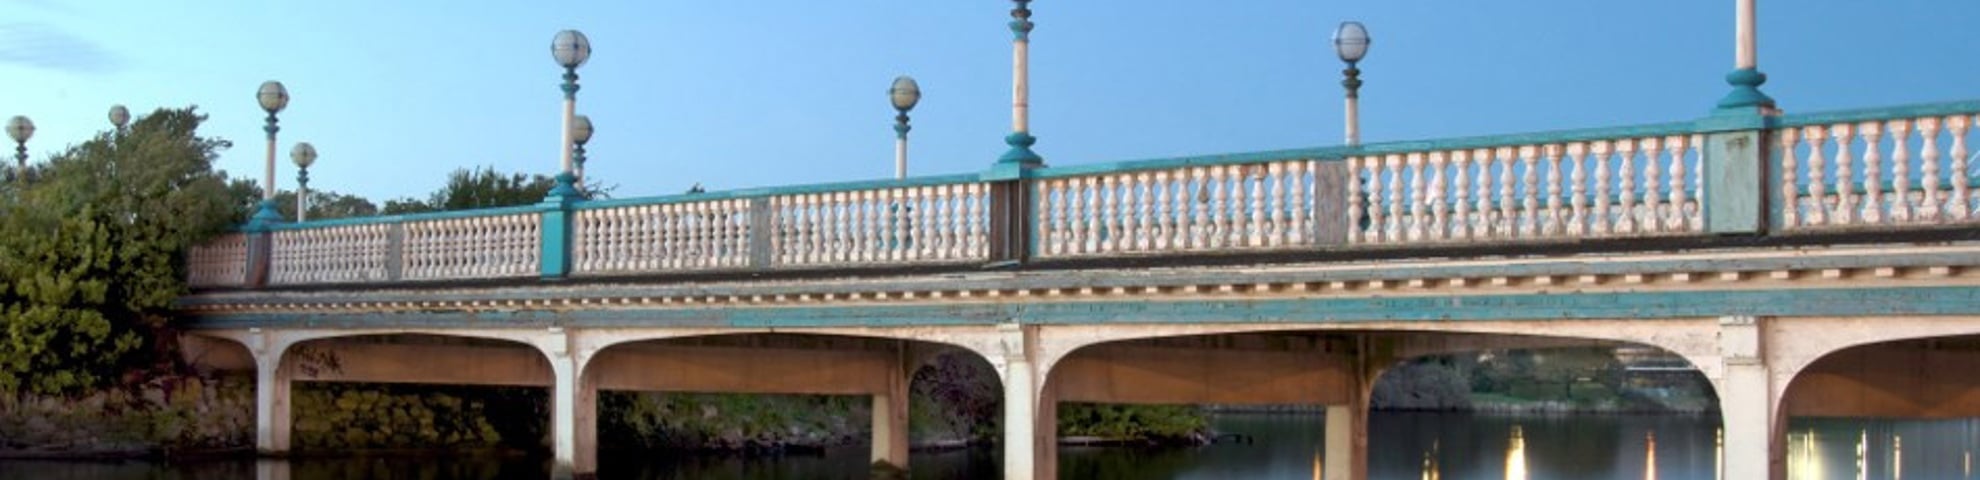 A large bridge over a lake. It is daytime and the sky is blue. 